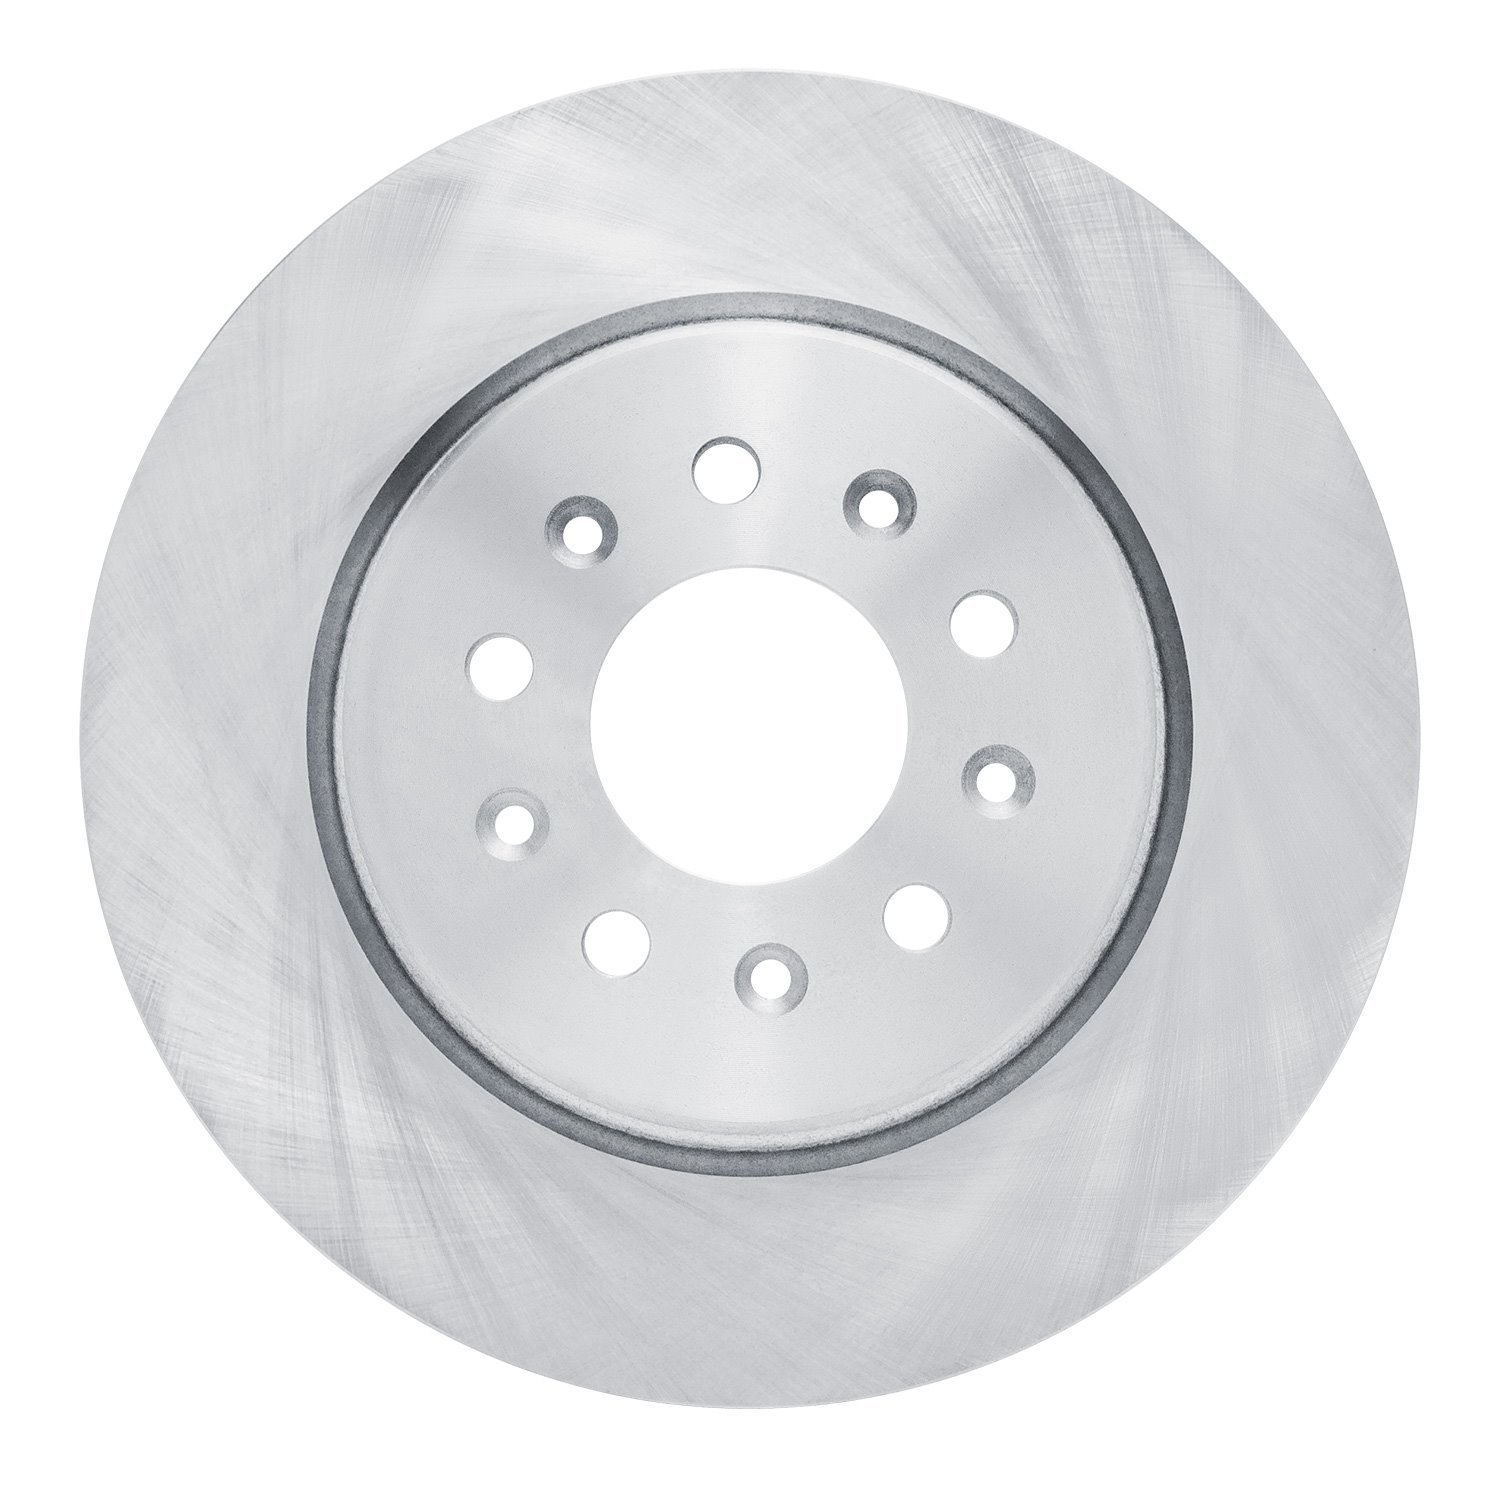 600-46063 Brake Rotor, Fits Select GM, Position: Rear